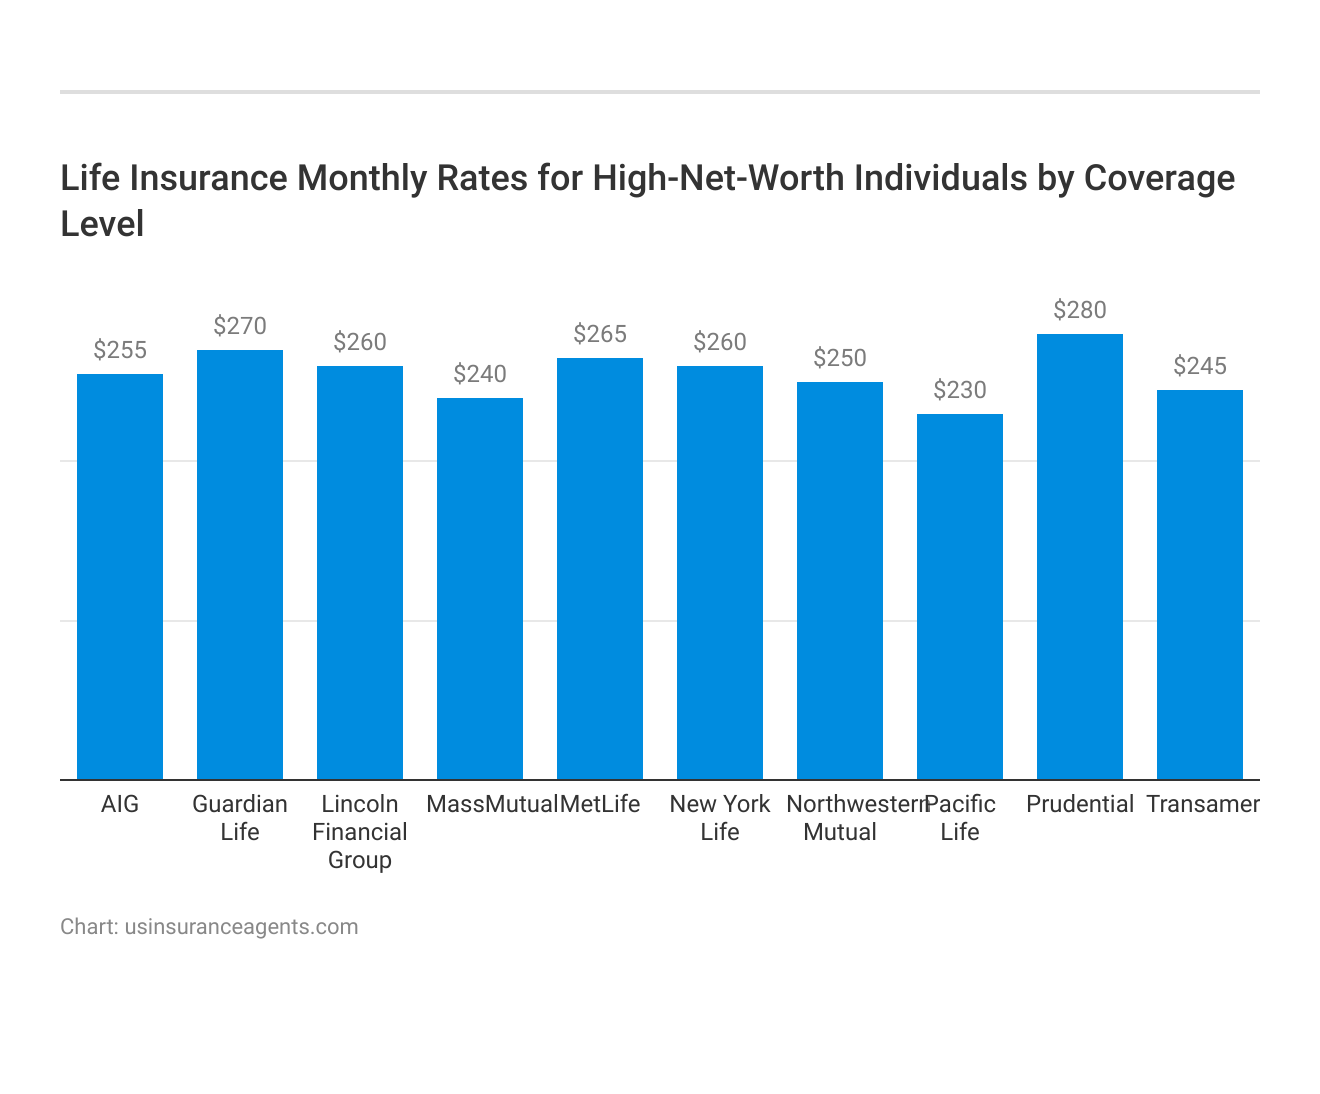 <h3>Life Insurance Monthly Rates for High-Net-Worth Individuals by Coverage Level</h3>